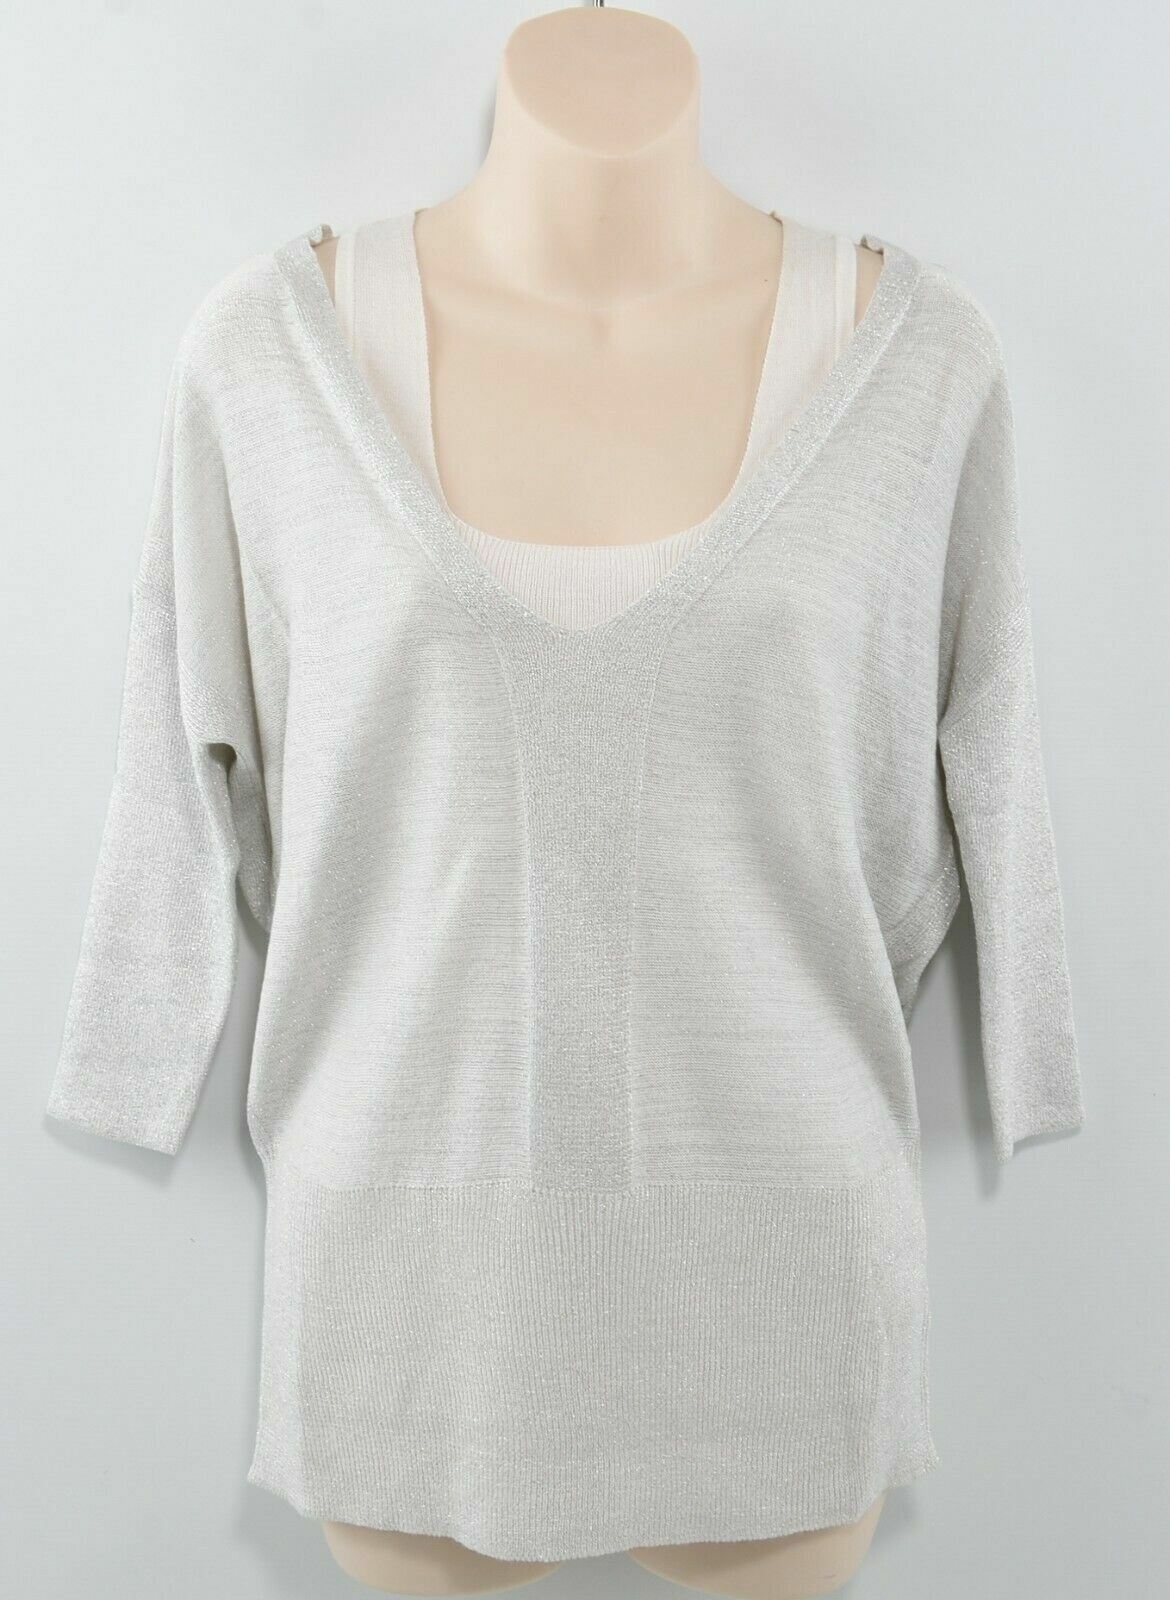 NEXT Women's 2-pc Top, Knitted Tank & Off The Shoulder Jumper, Beige/Silver UK 6